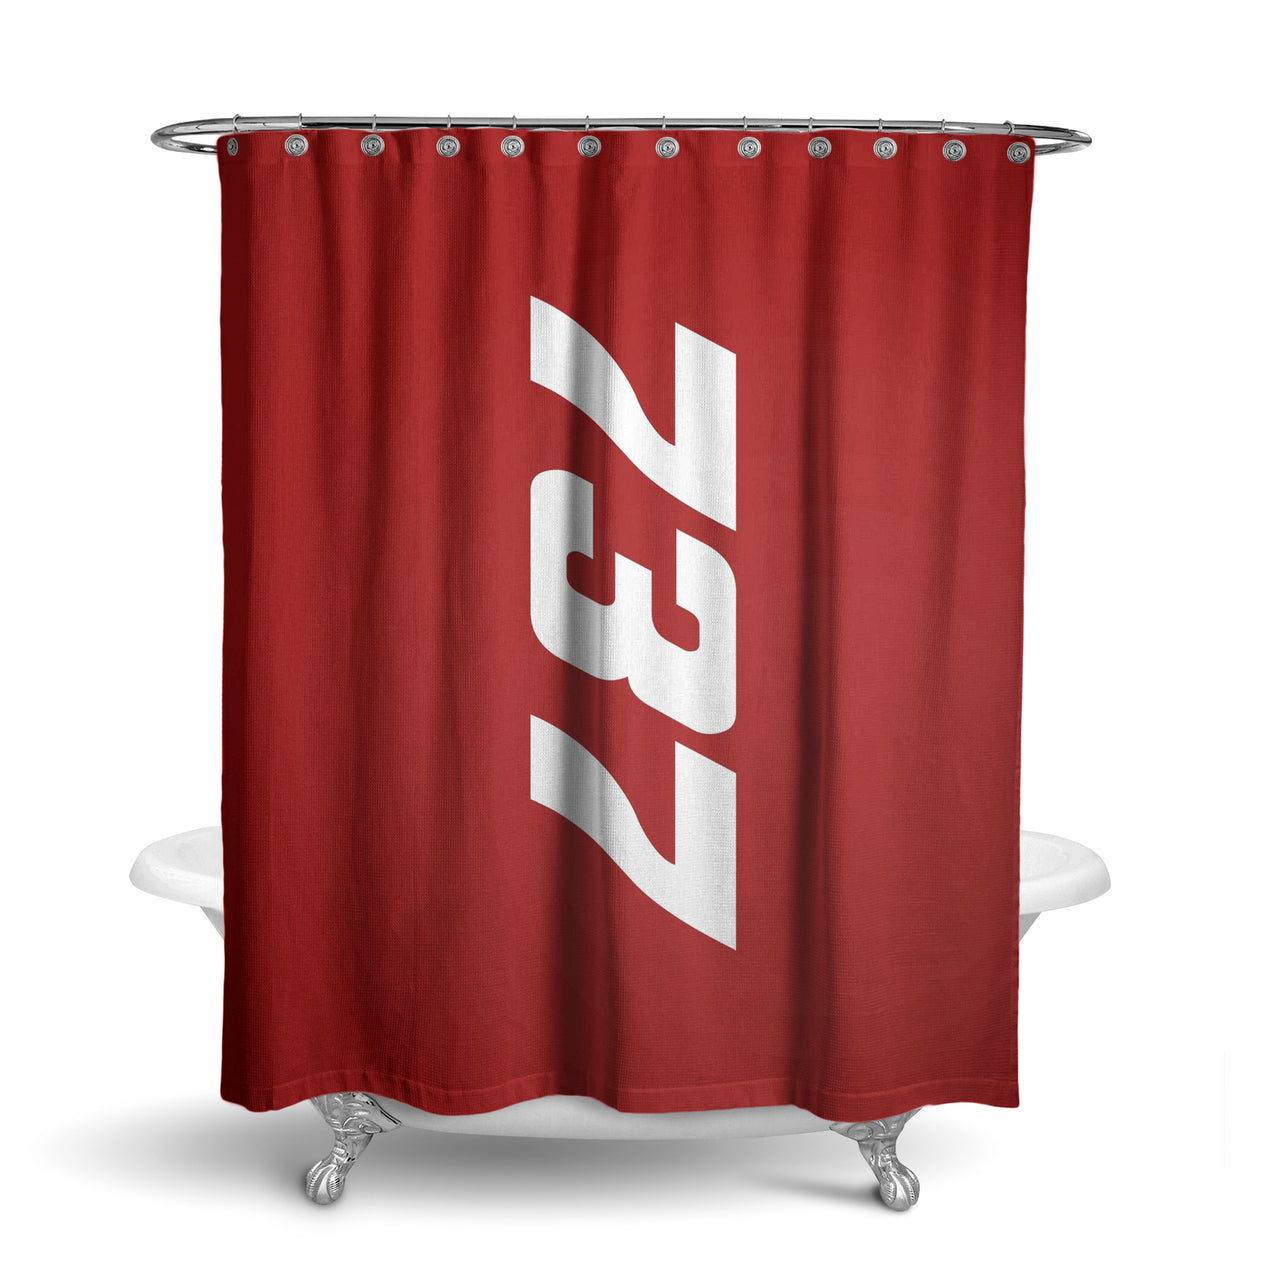 Boeing 737 Text Designed Shower Curtains